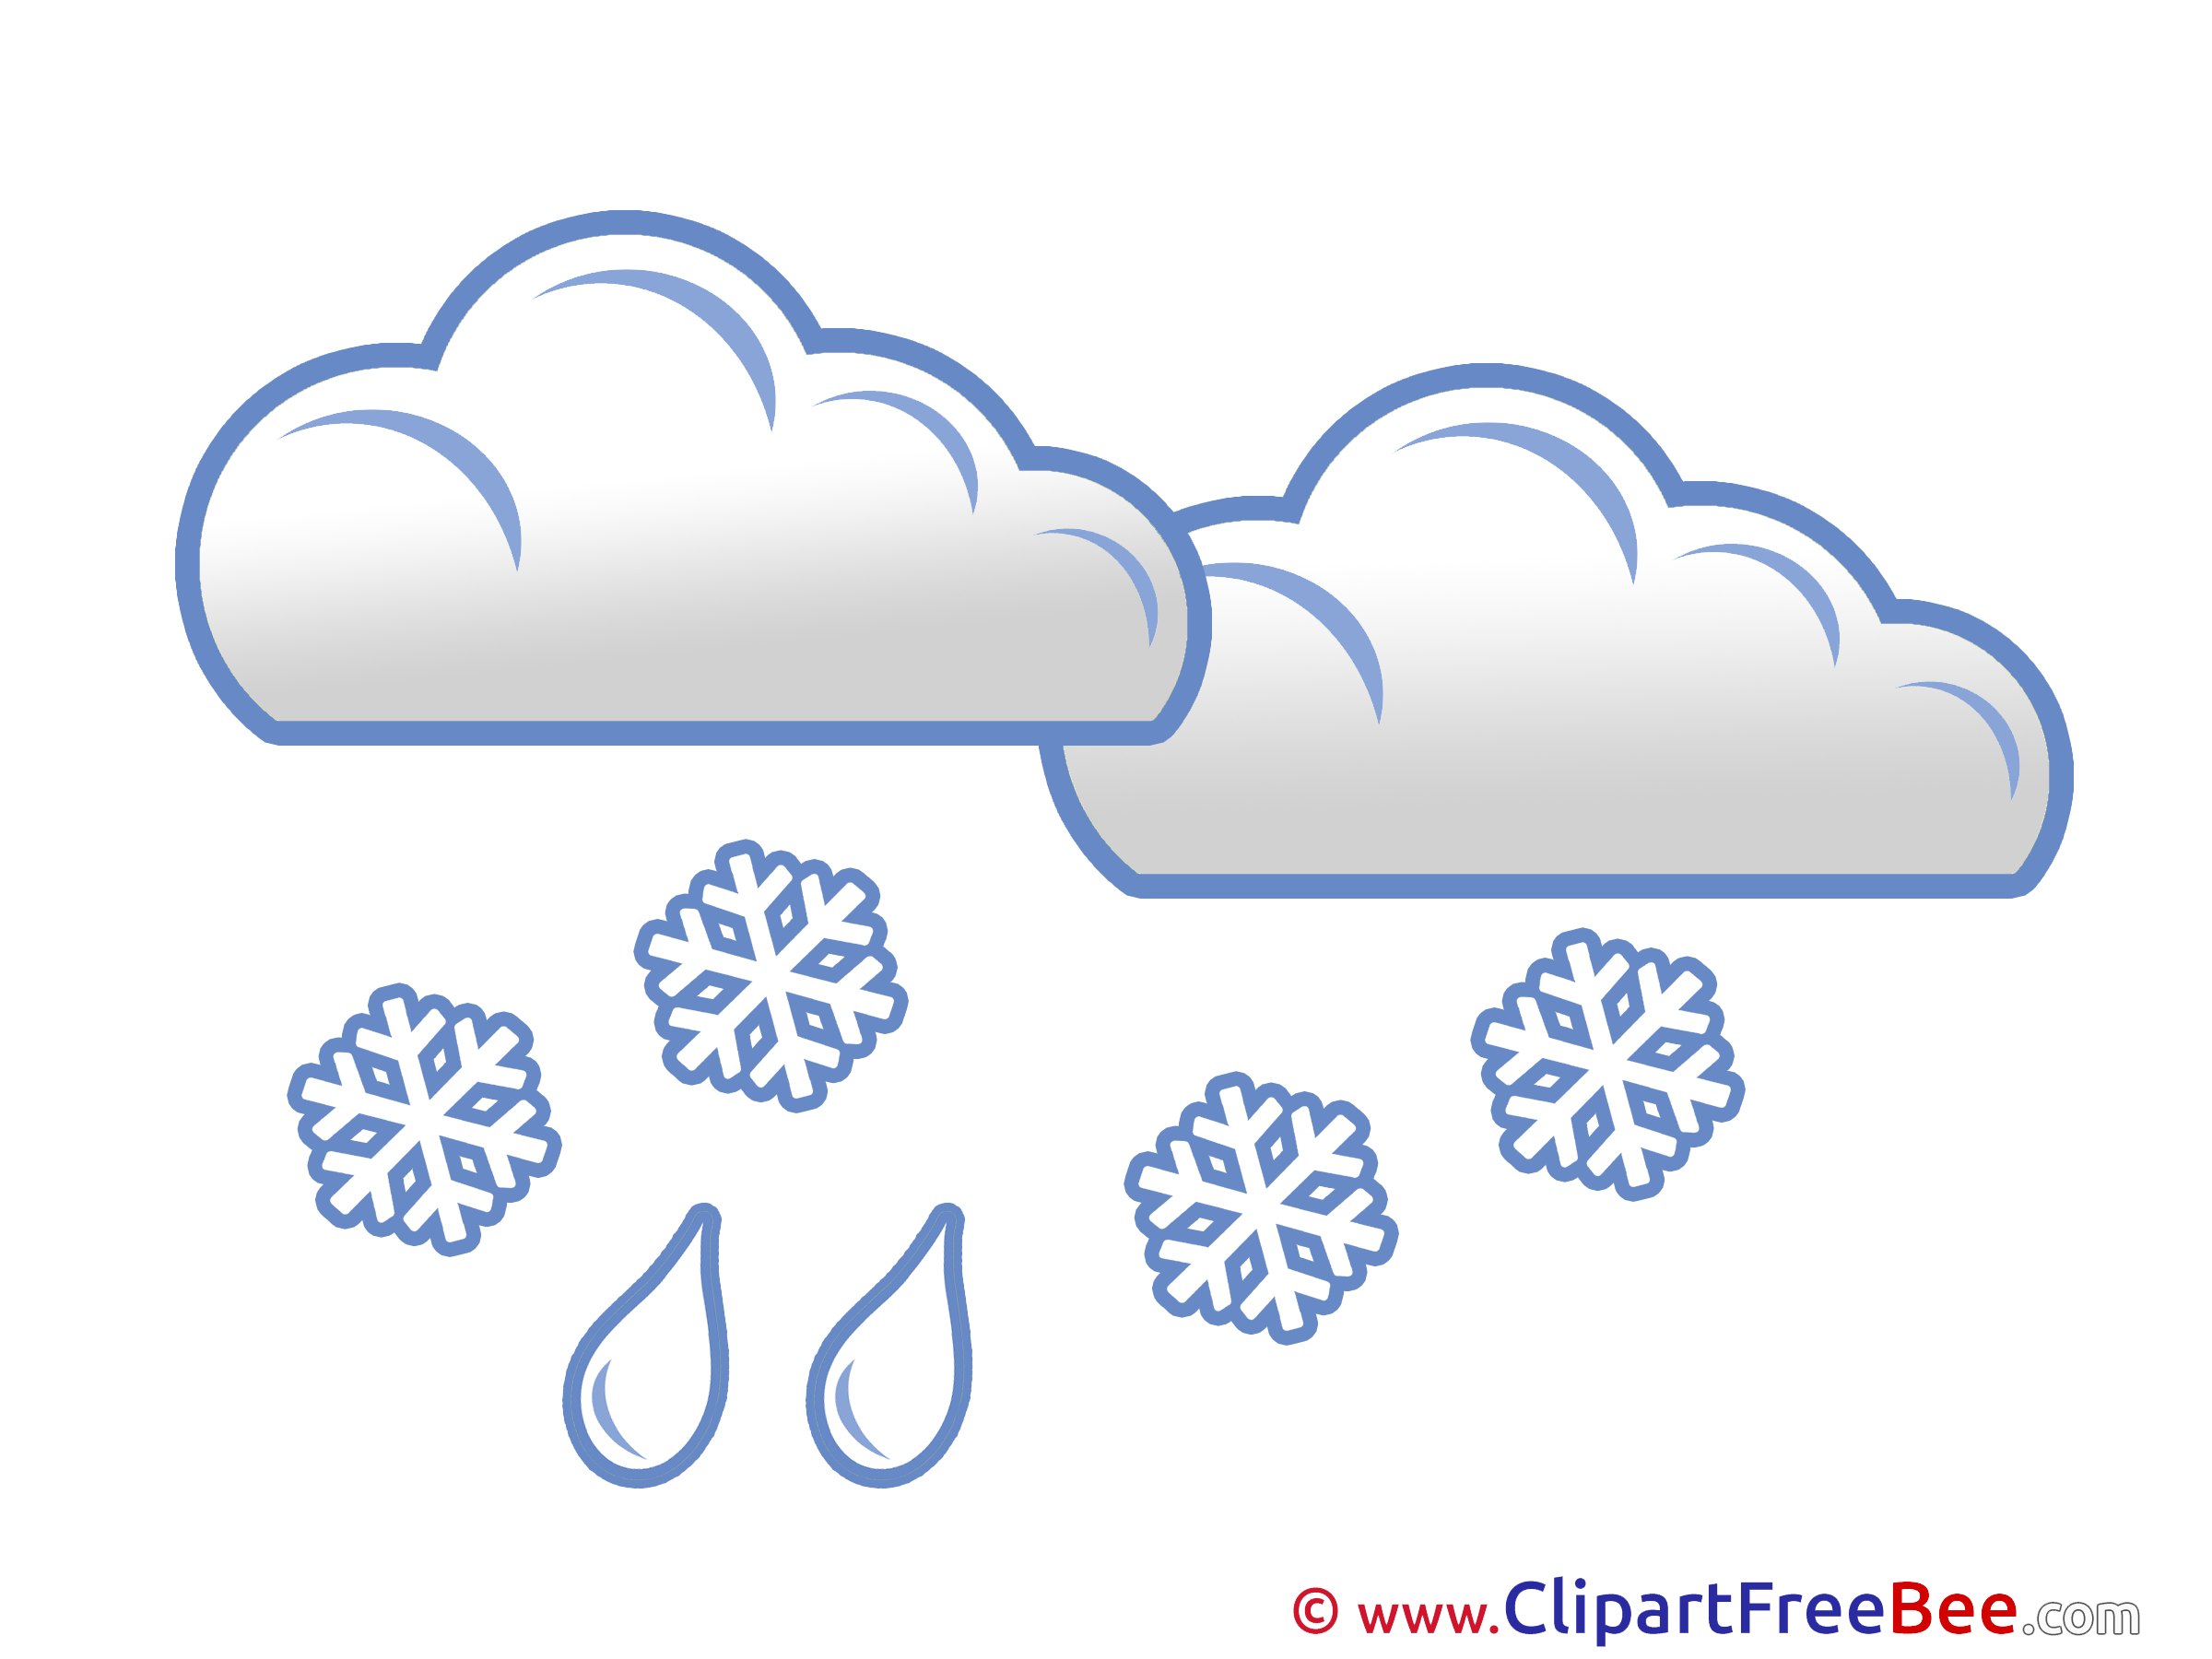 Snow Rain Clouds download Clip Art for free